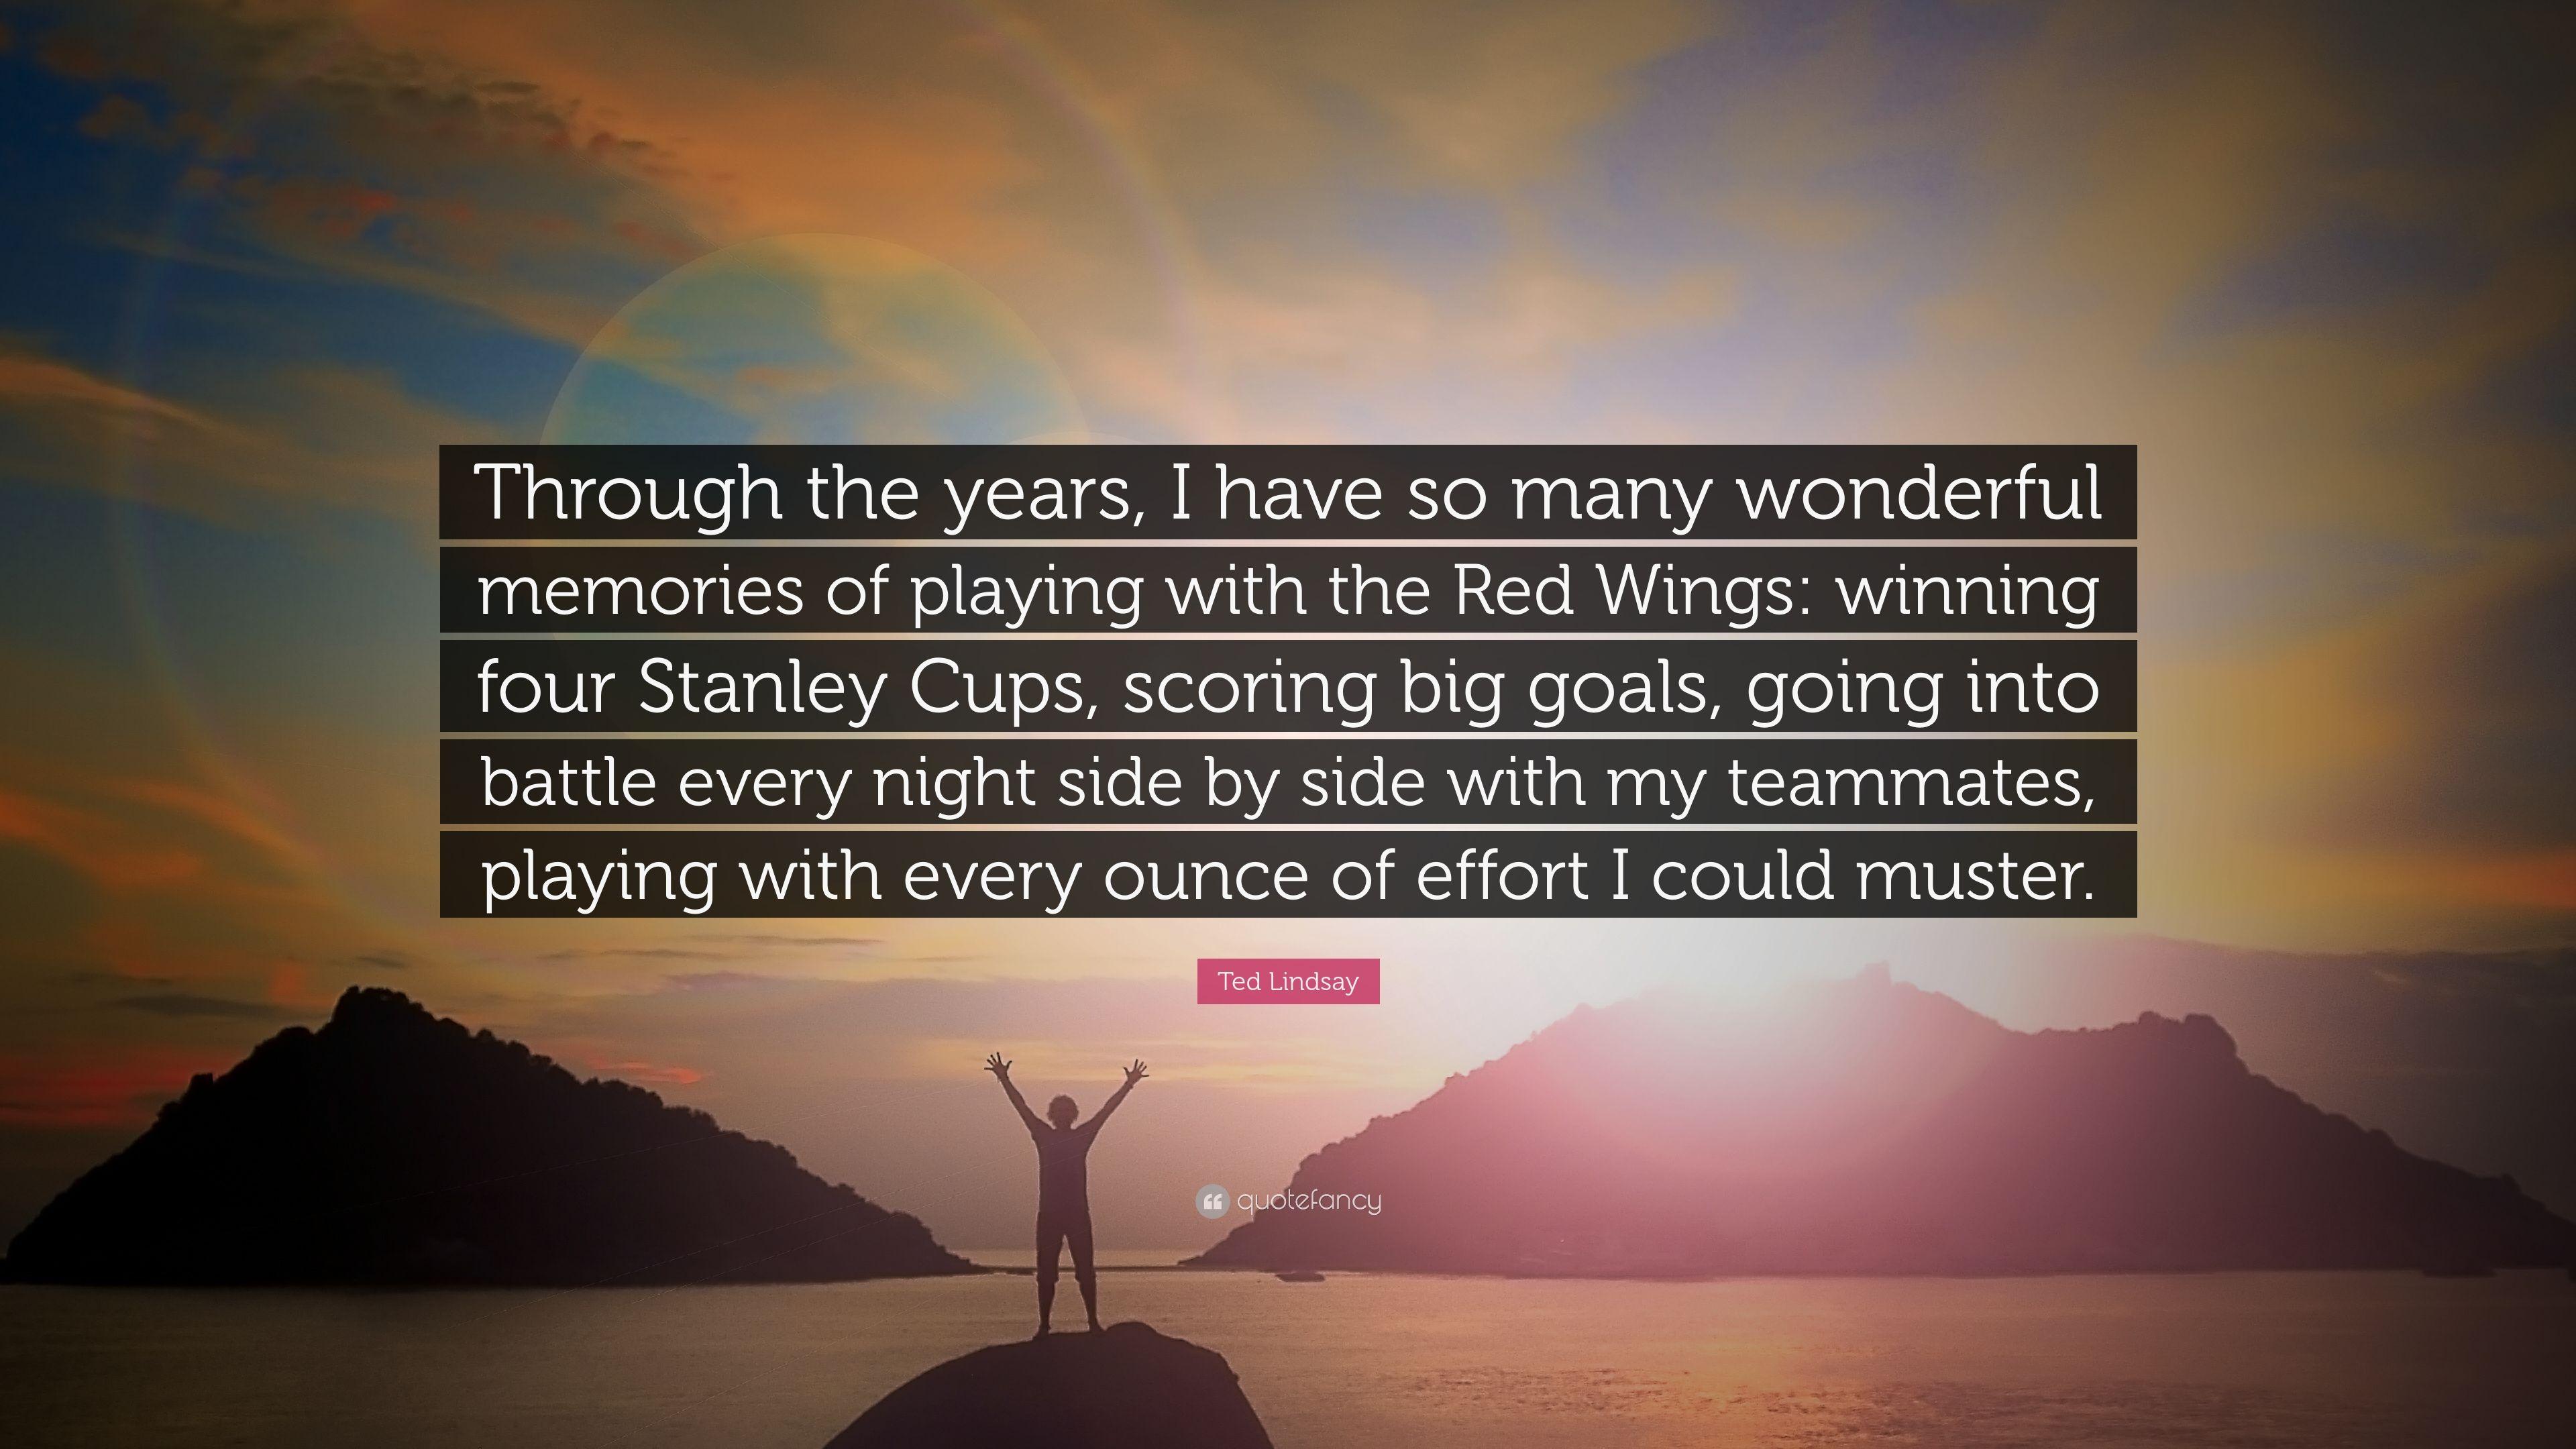 Ted Lindsay Quote: “Through the years, I have so many wonderful